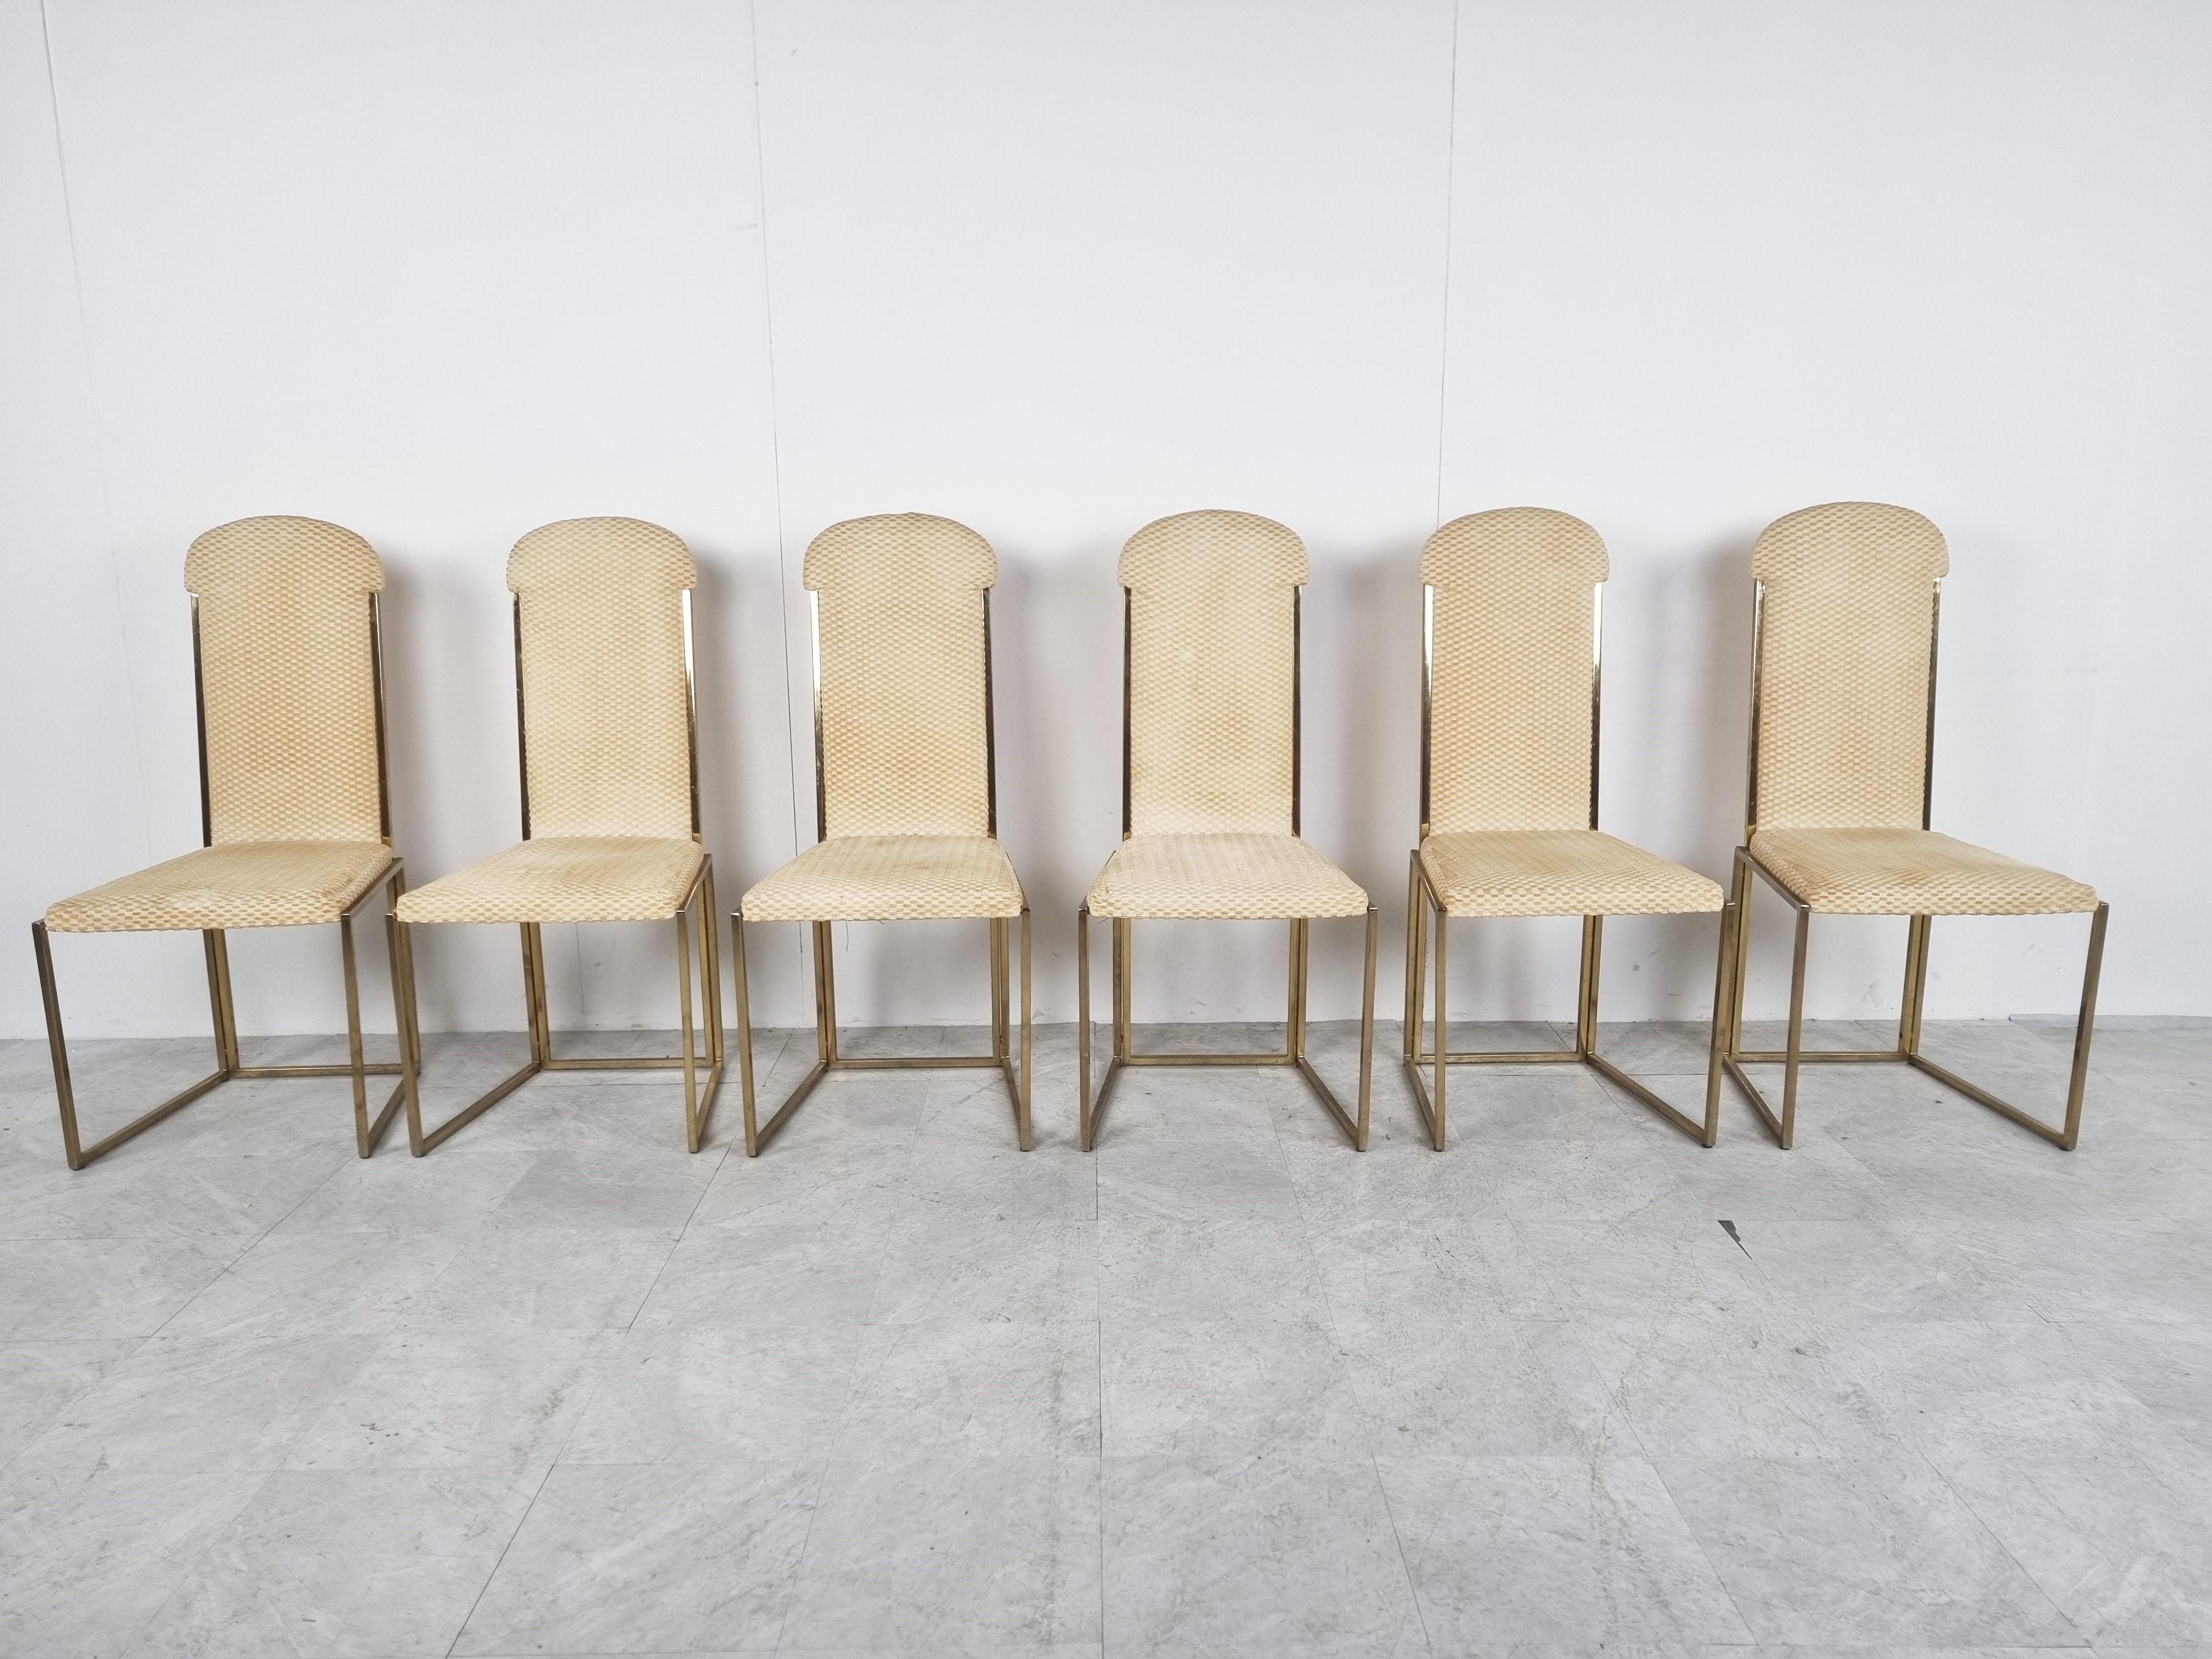 Set of six elegant high back dining room chairs manufactured by Belgochrom.

The chairs consist of fine brass frames upholstered with the original fabric which has a beige/brown checquered motive.

They look good in modern day